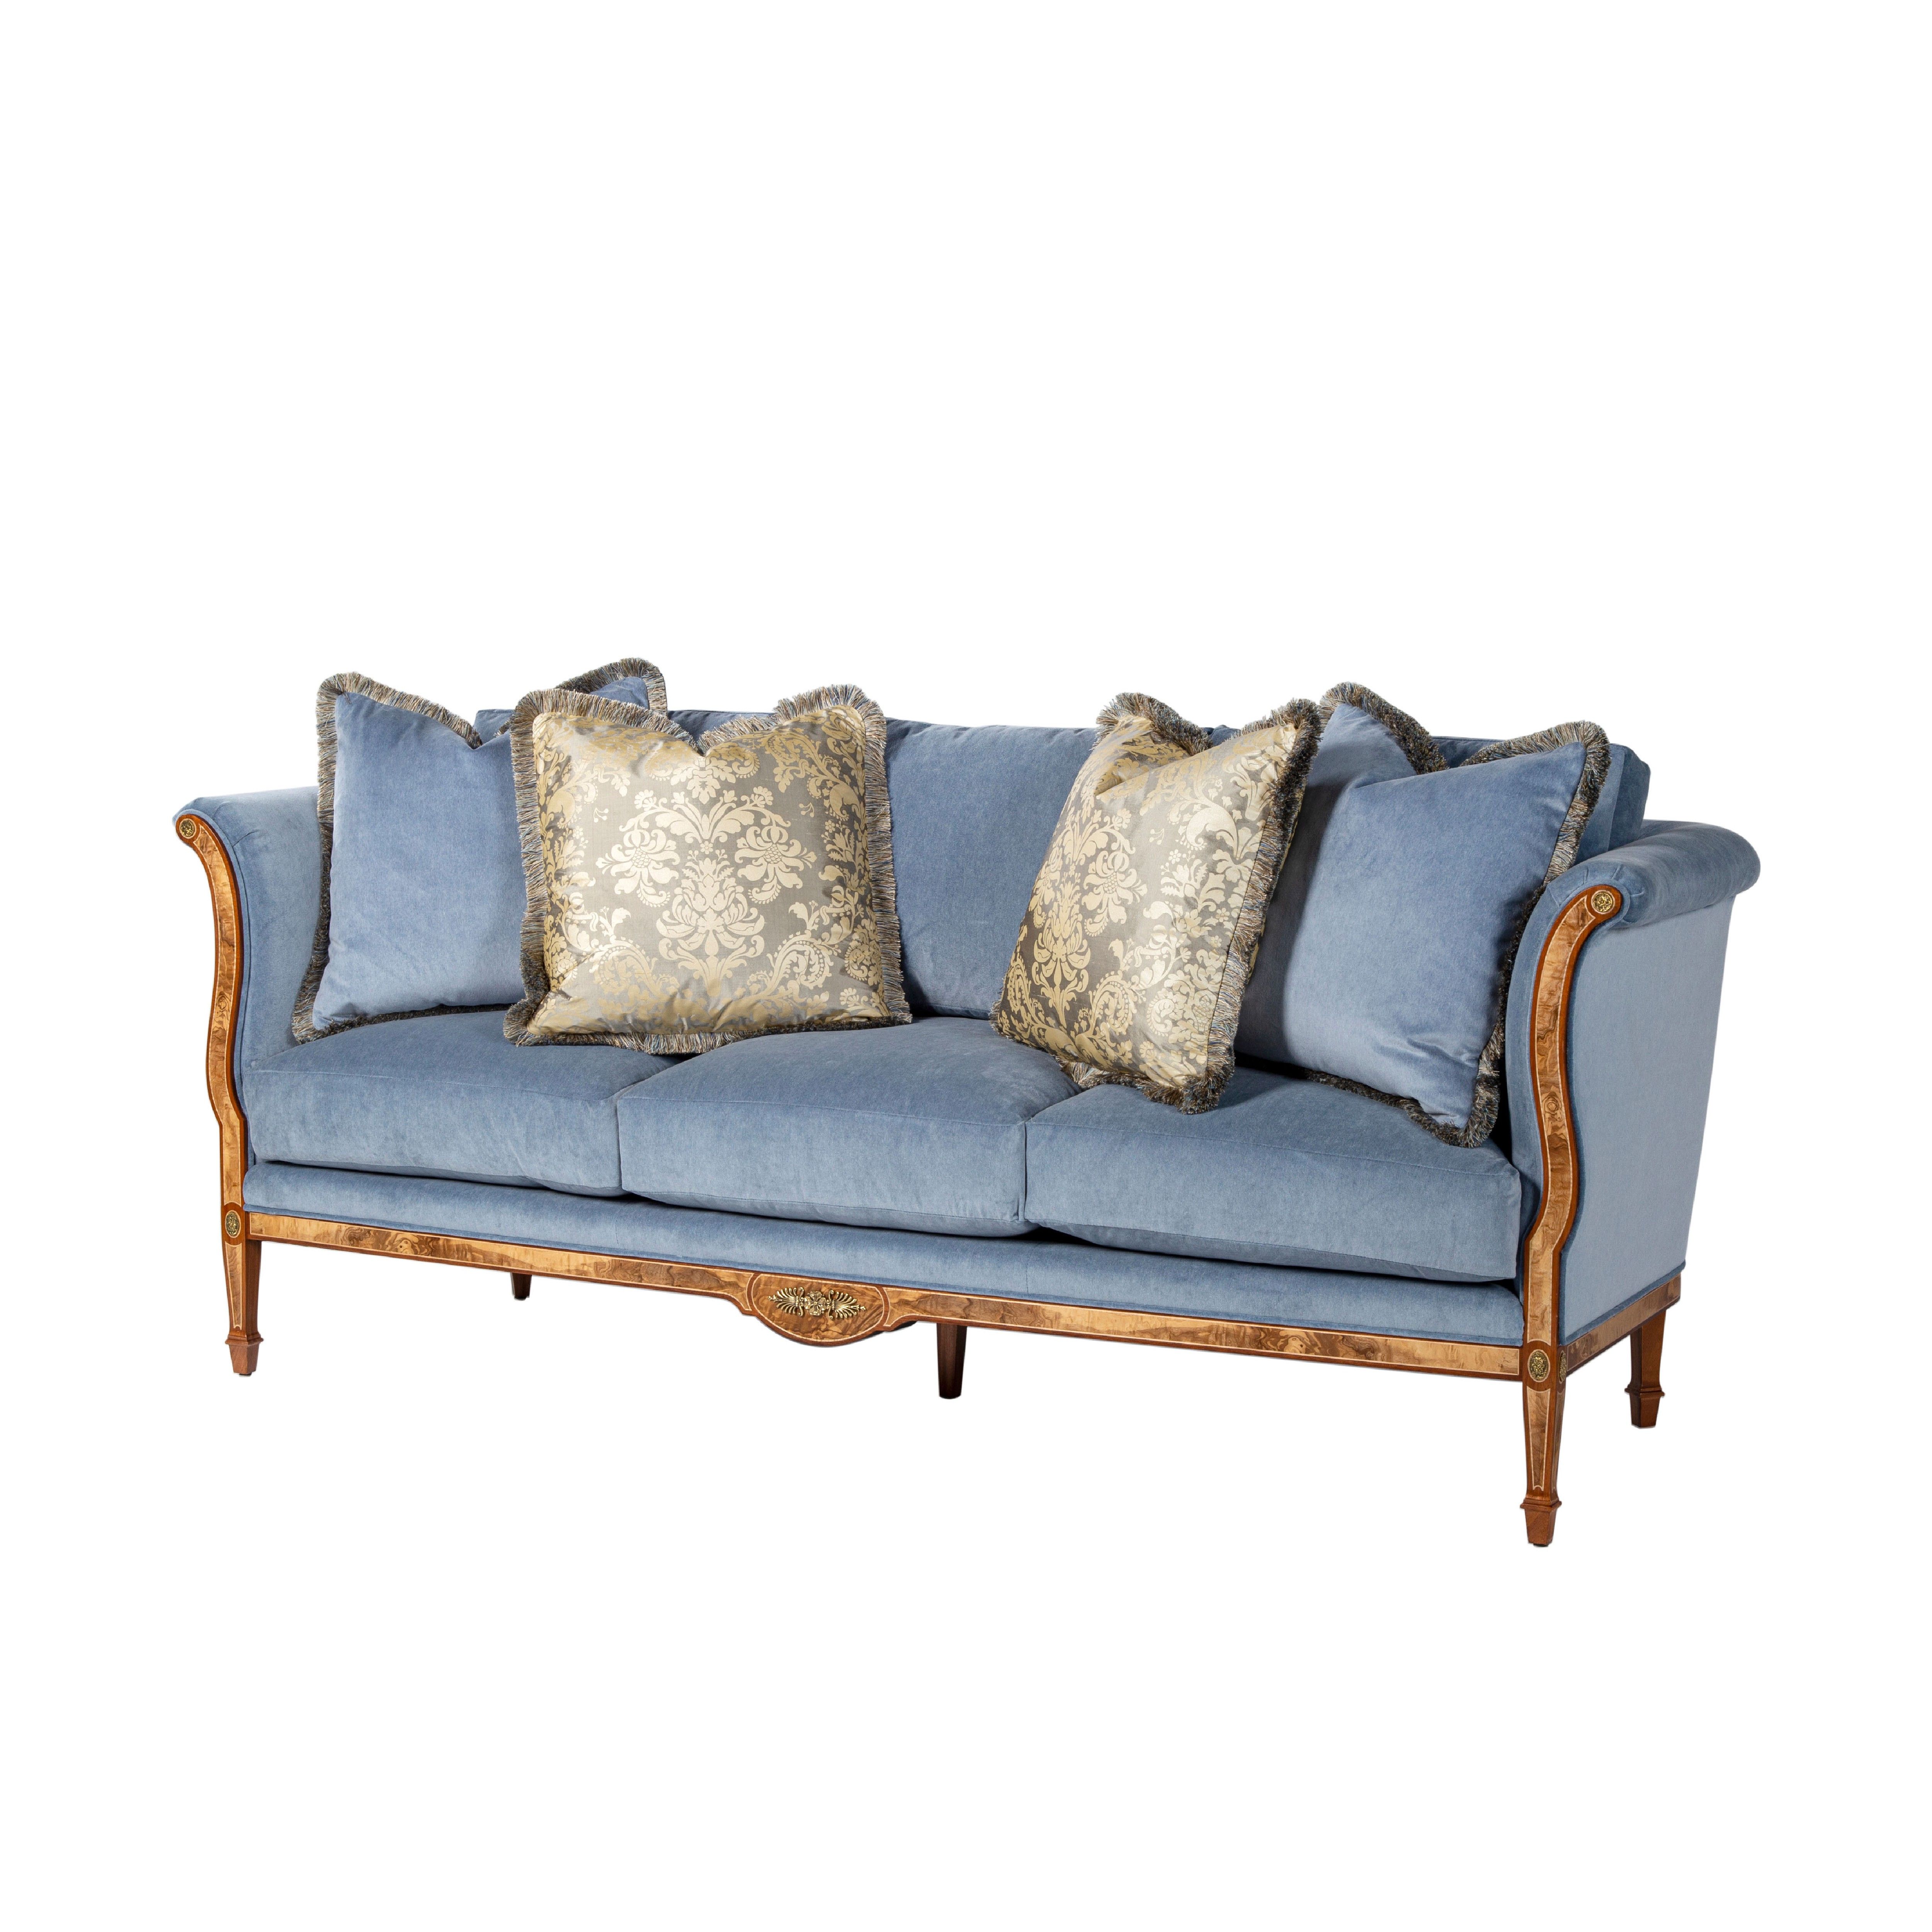 Our latest three-seater wood frame sofa